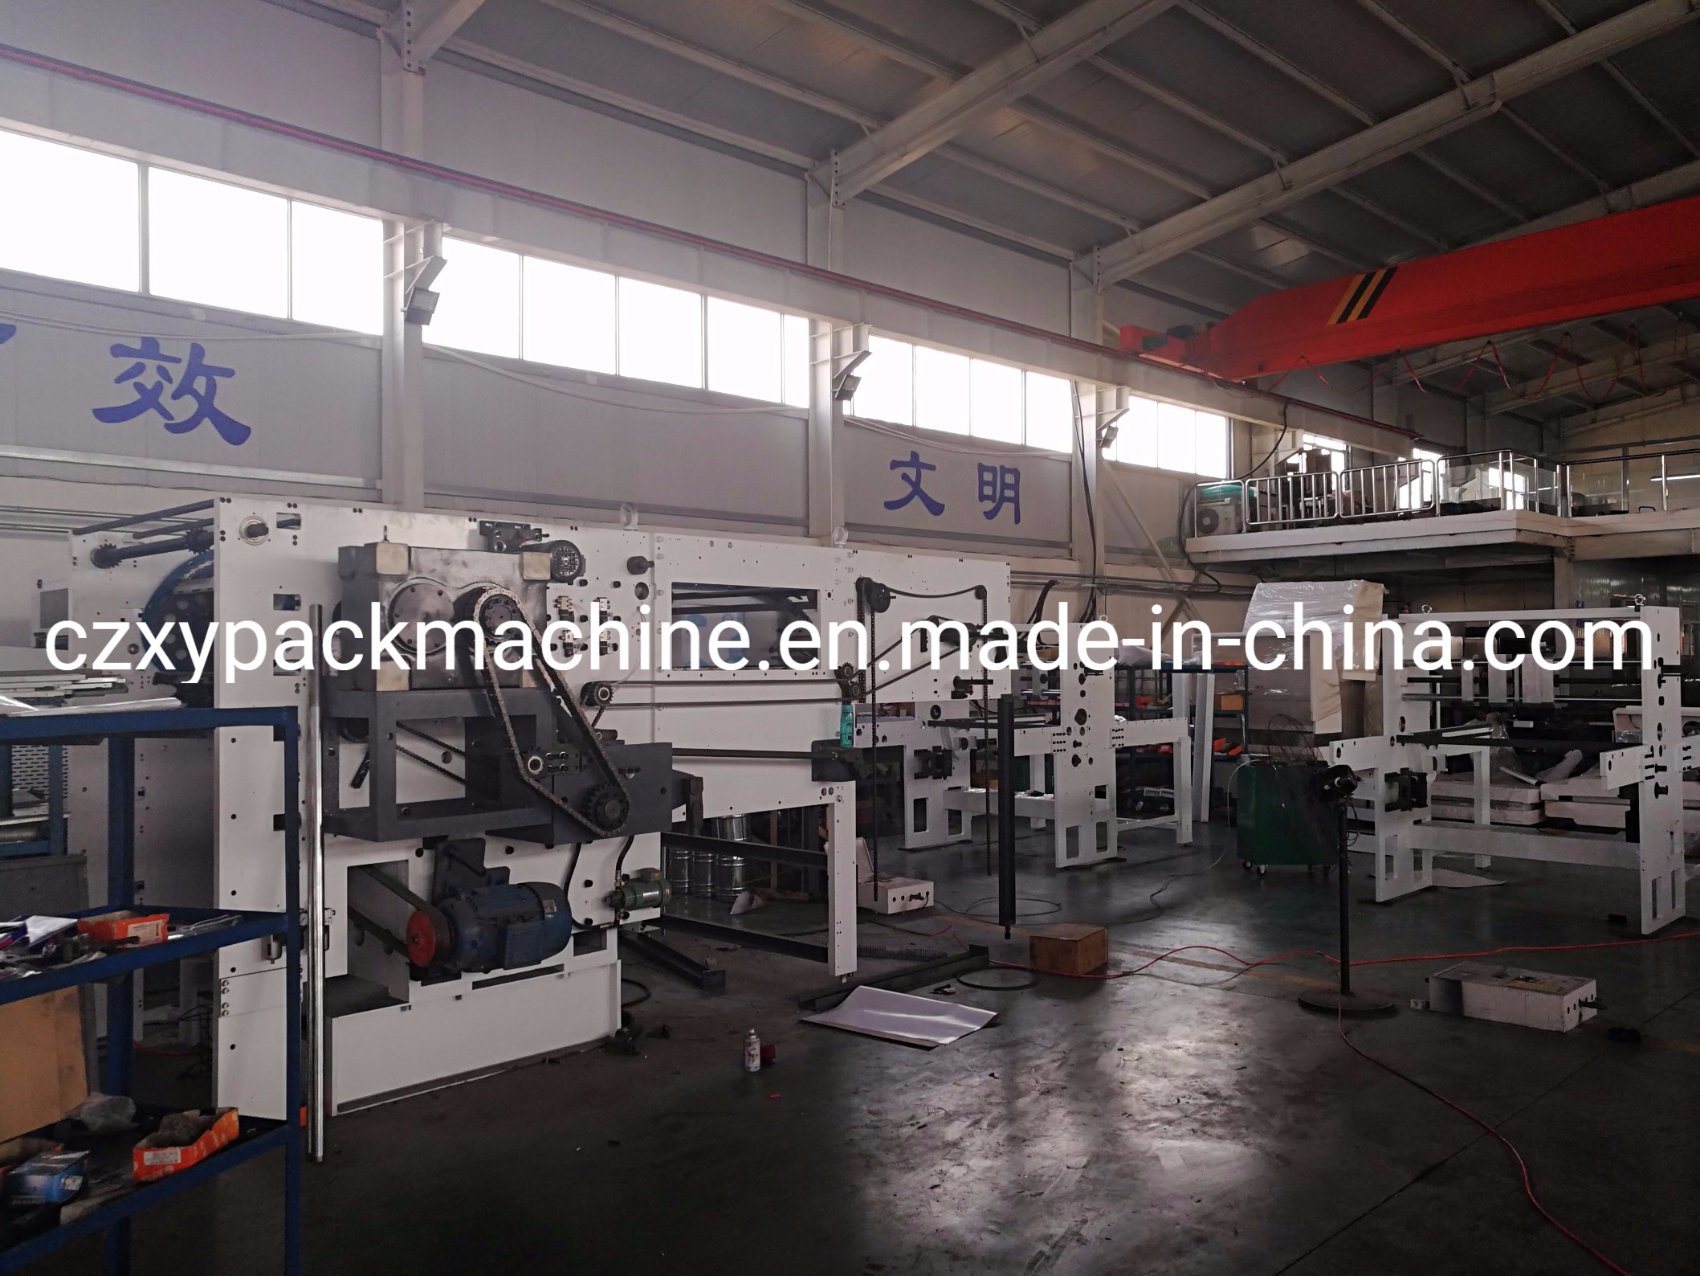 Full Automatic Flat Bed Die Cutting Creasing Machine with Stripping